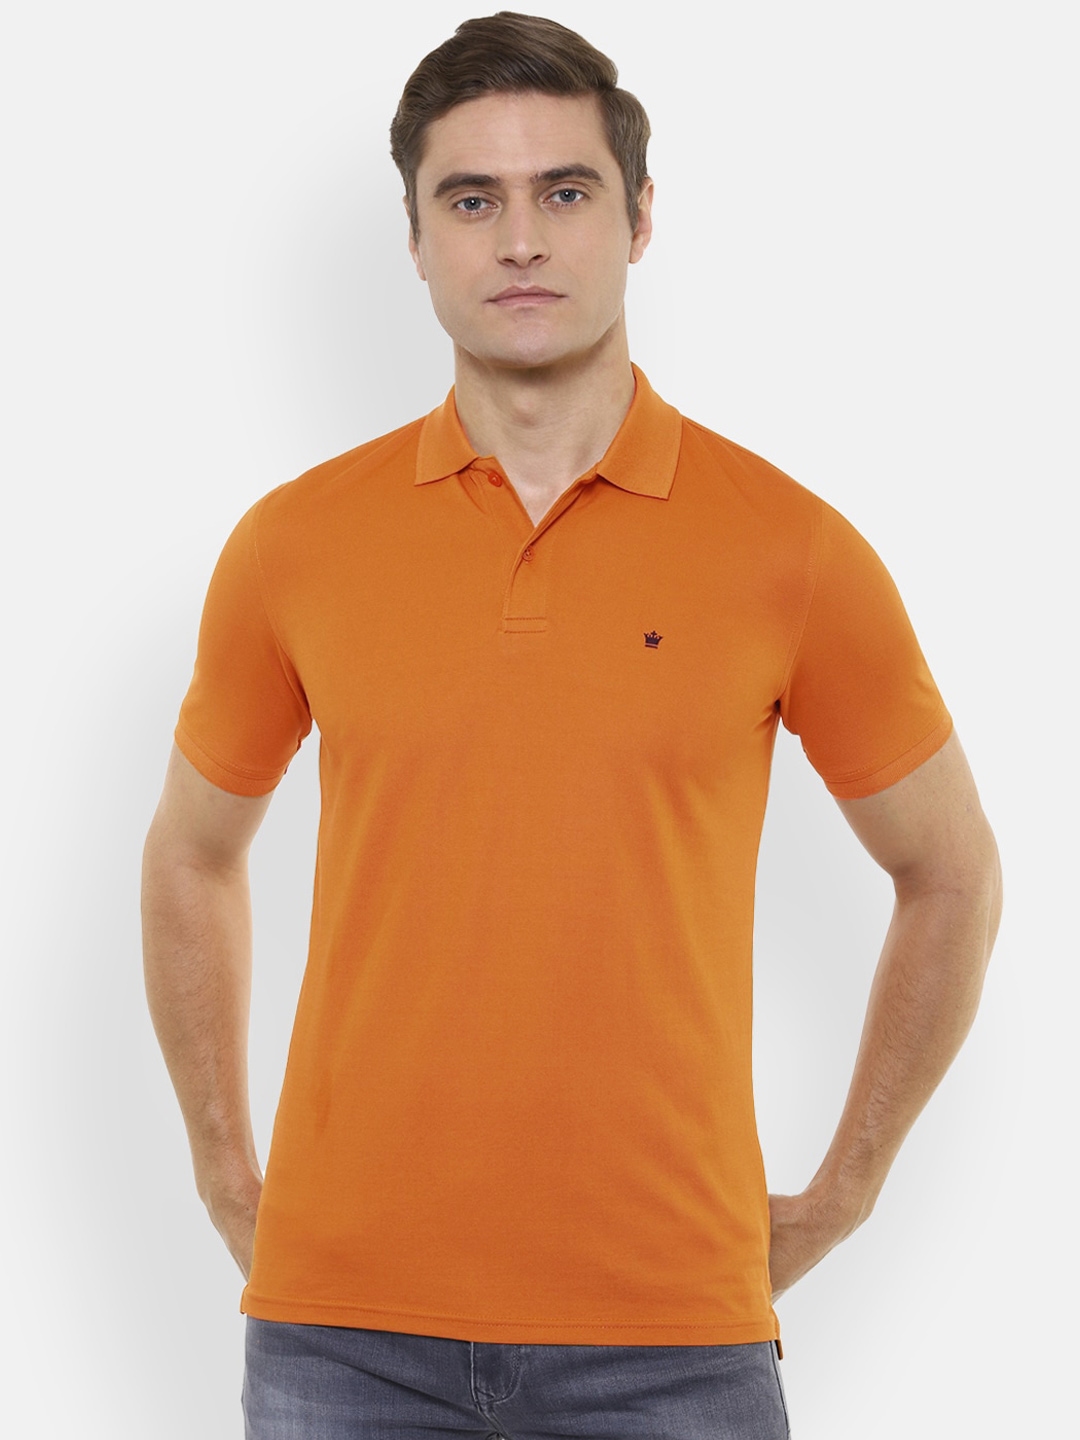 Louis Philippe Men Yellow Solid Polo T-Shirt: Buy Louis Philippe